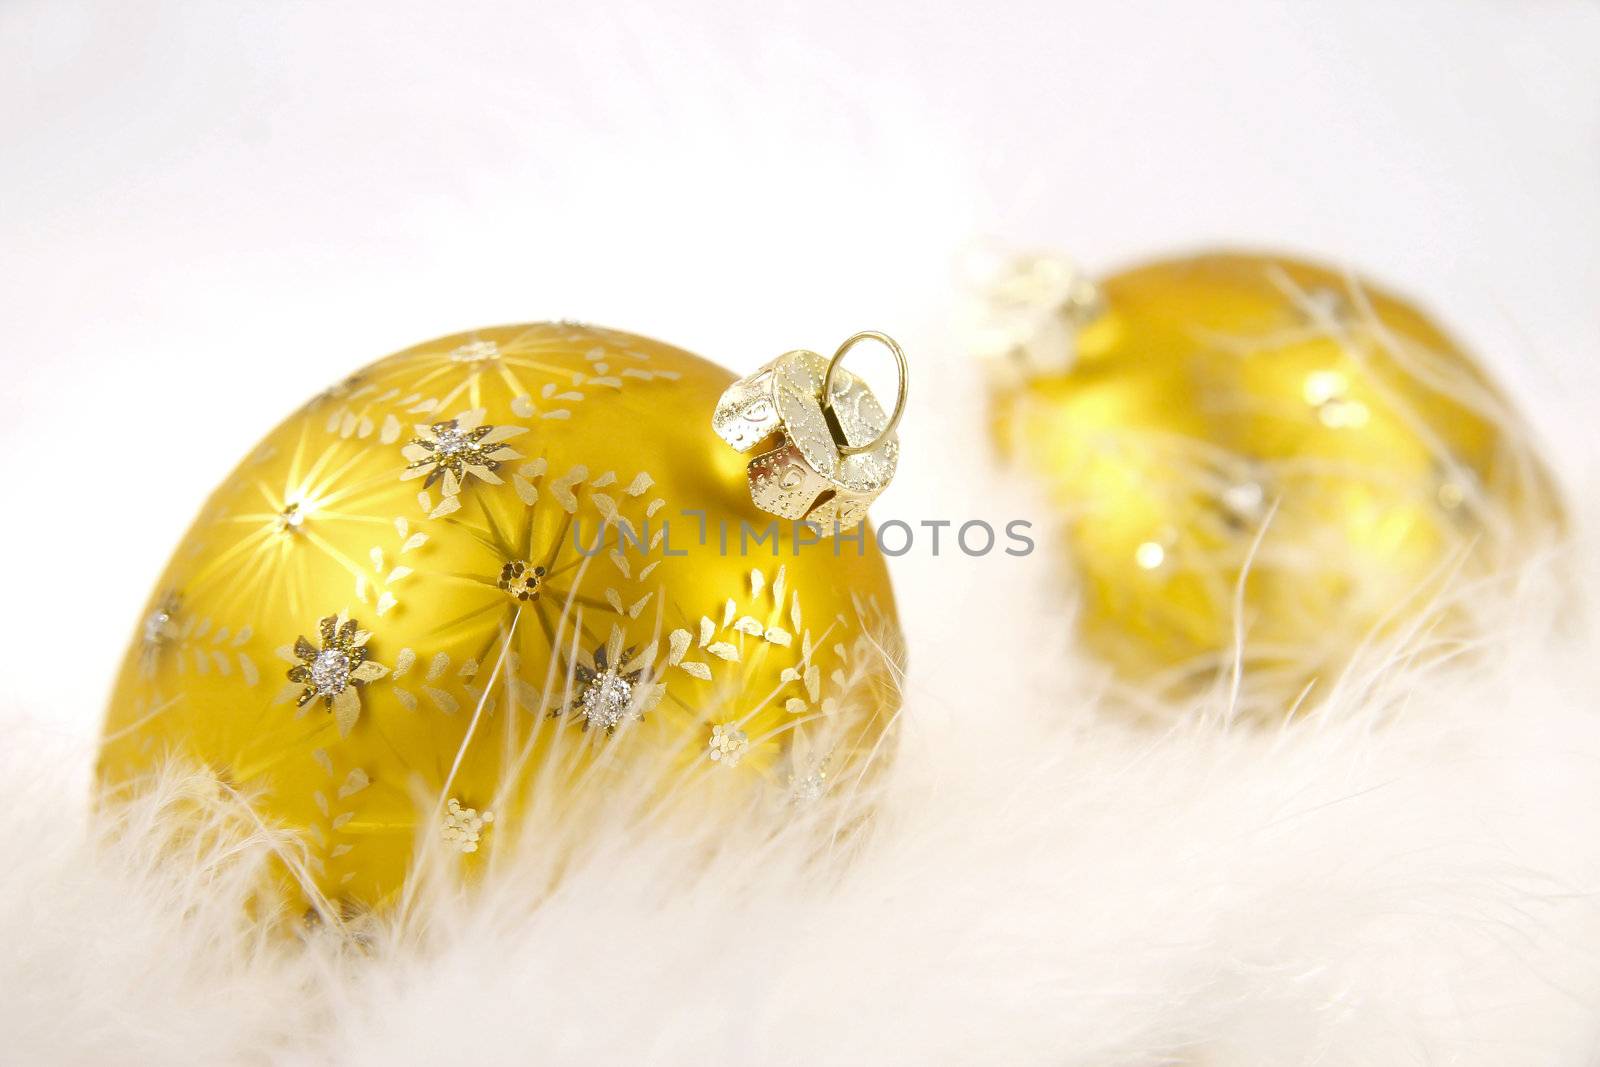 Gold balls with feathers by Sandralise